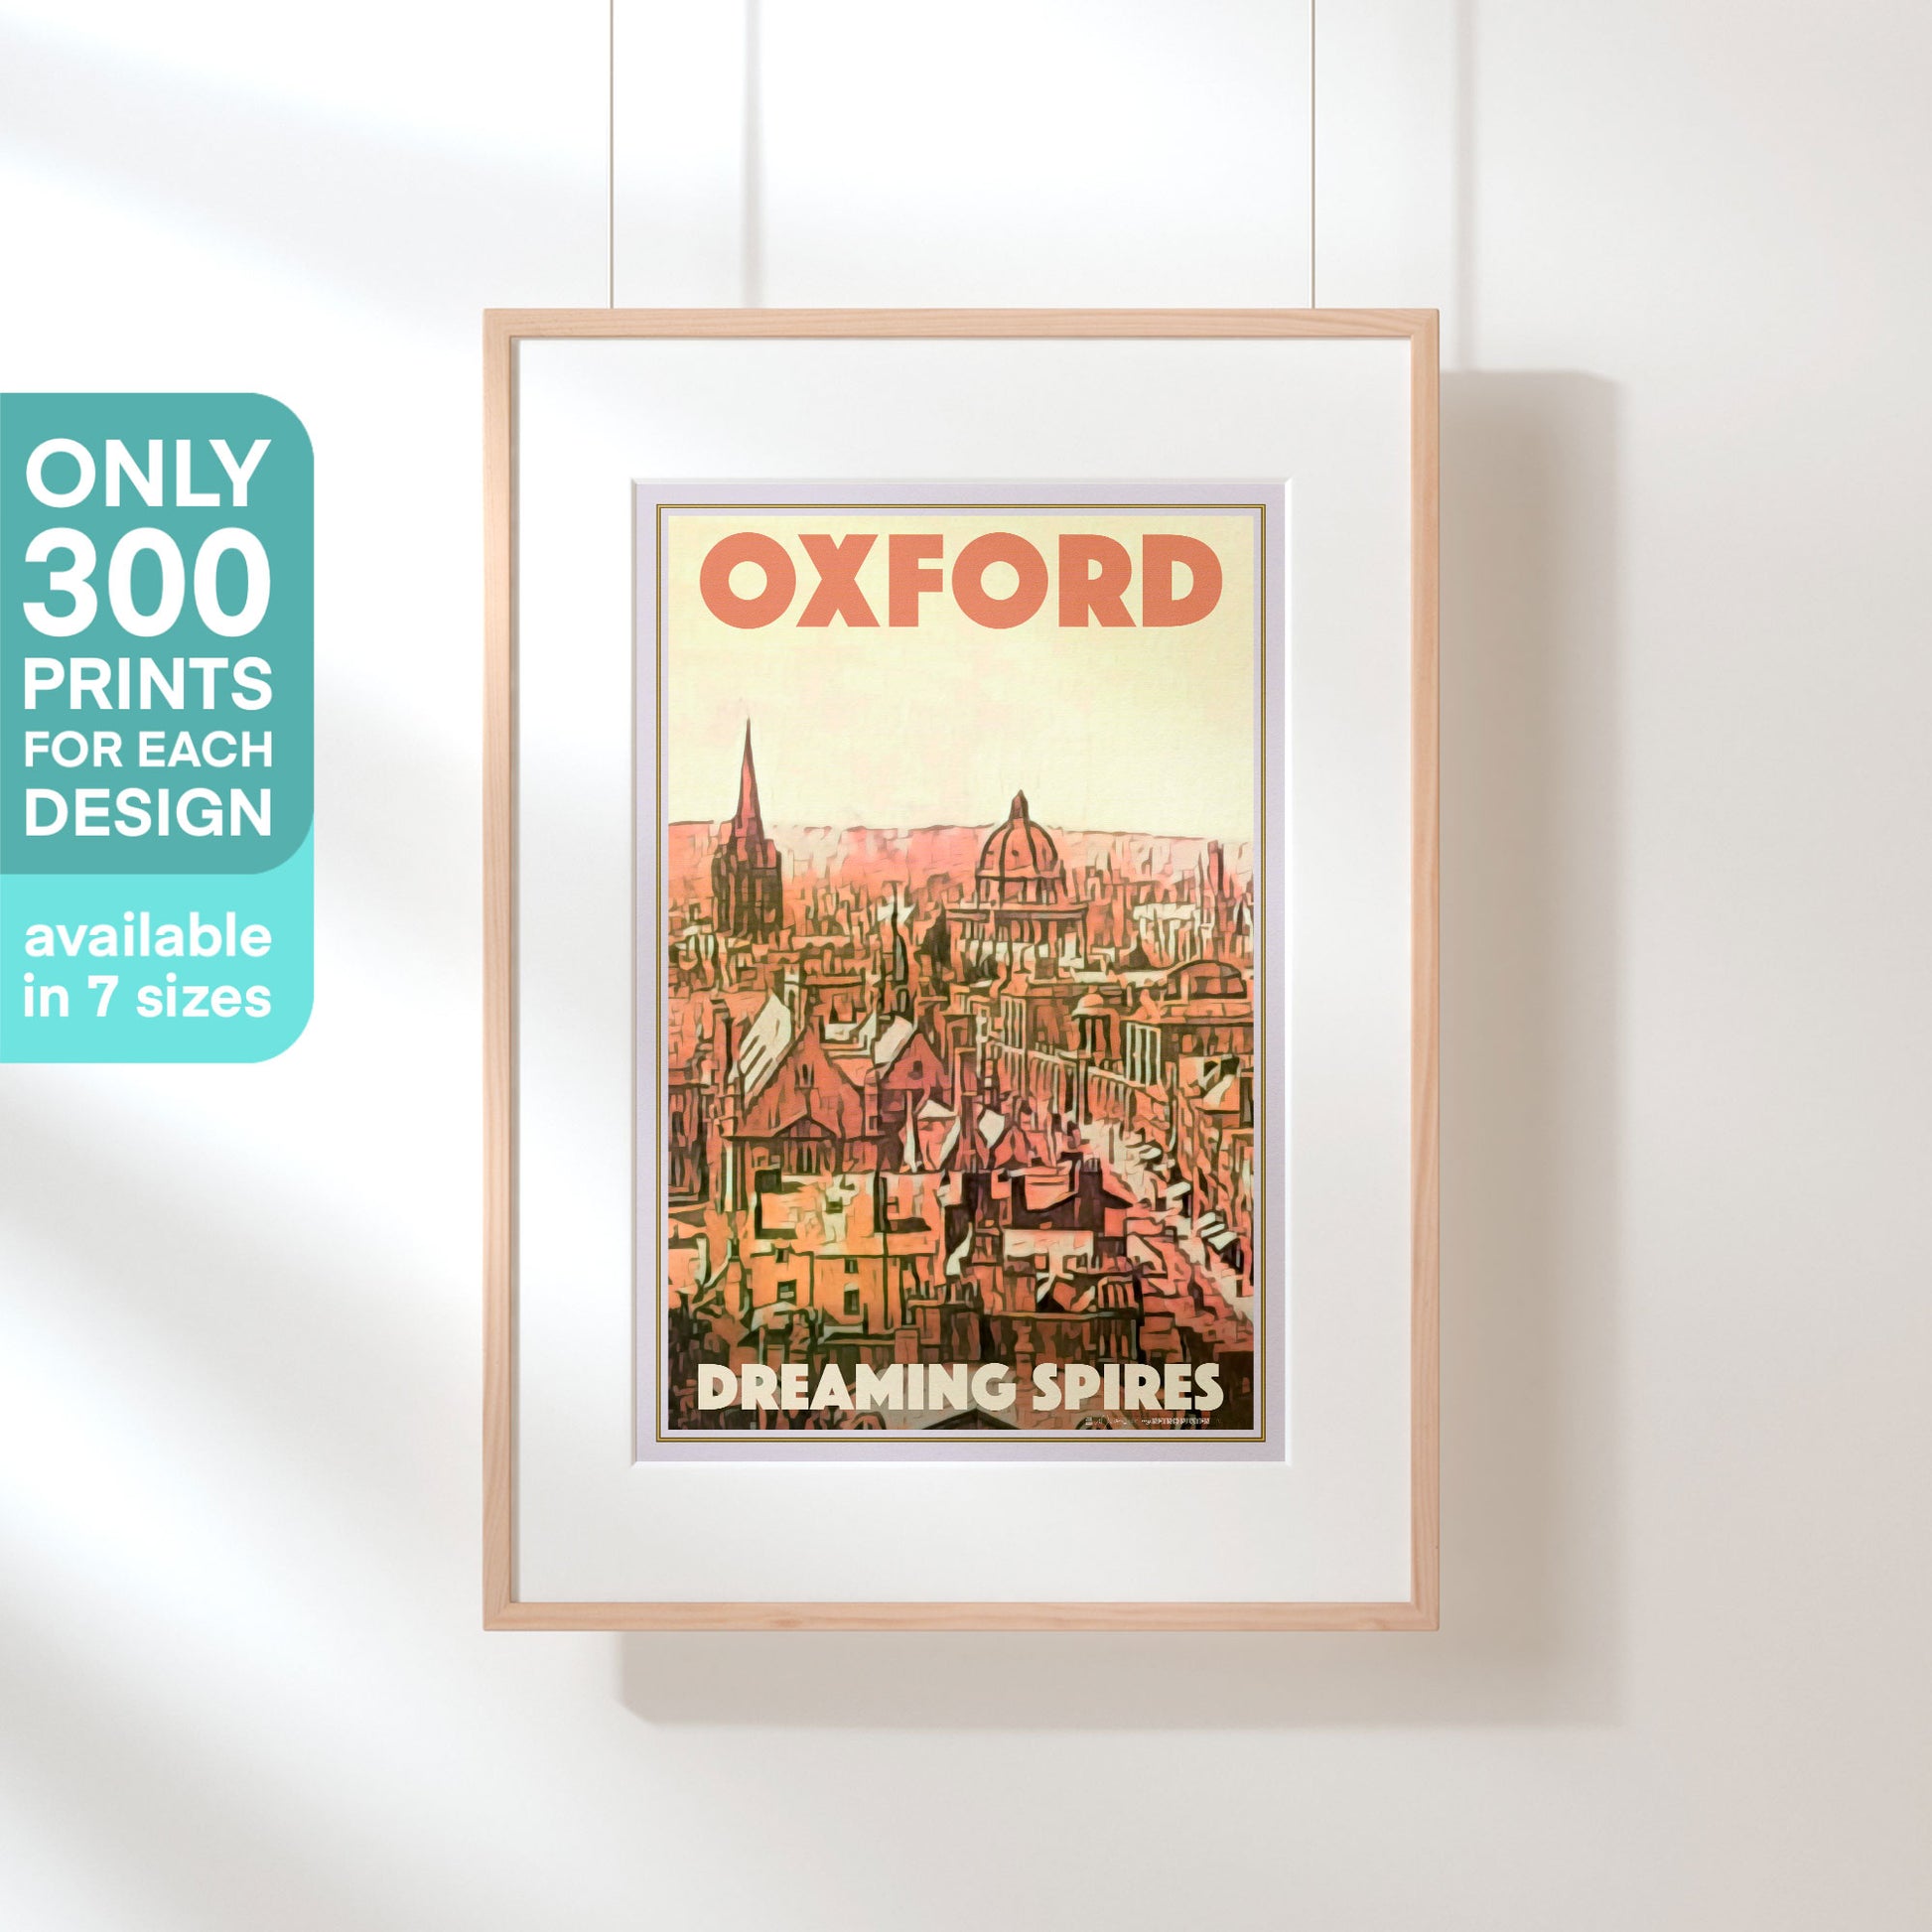 Limited Edition Oxford poster by Alecse | 300ex